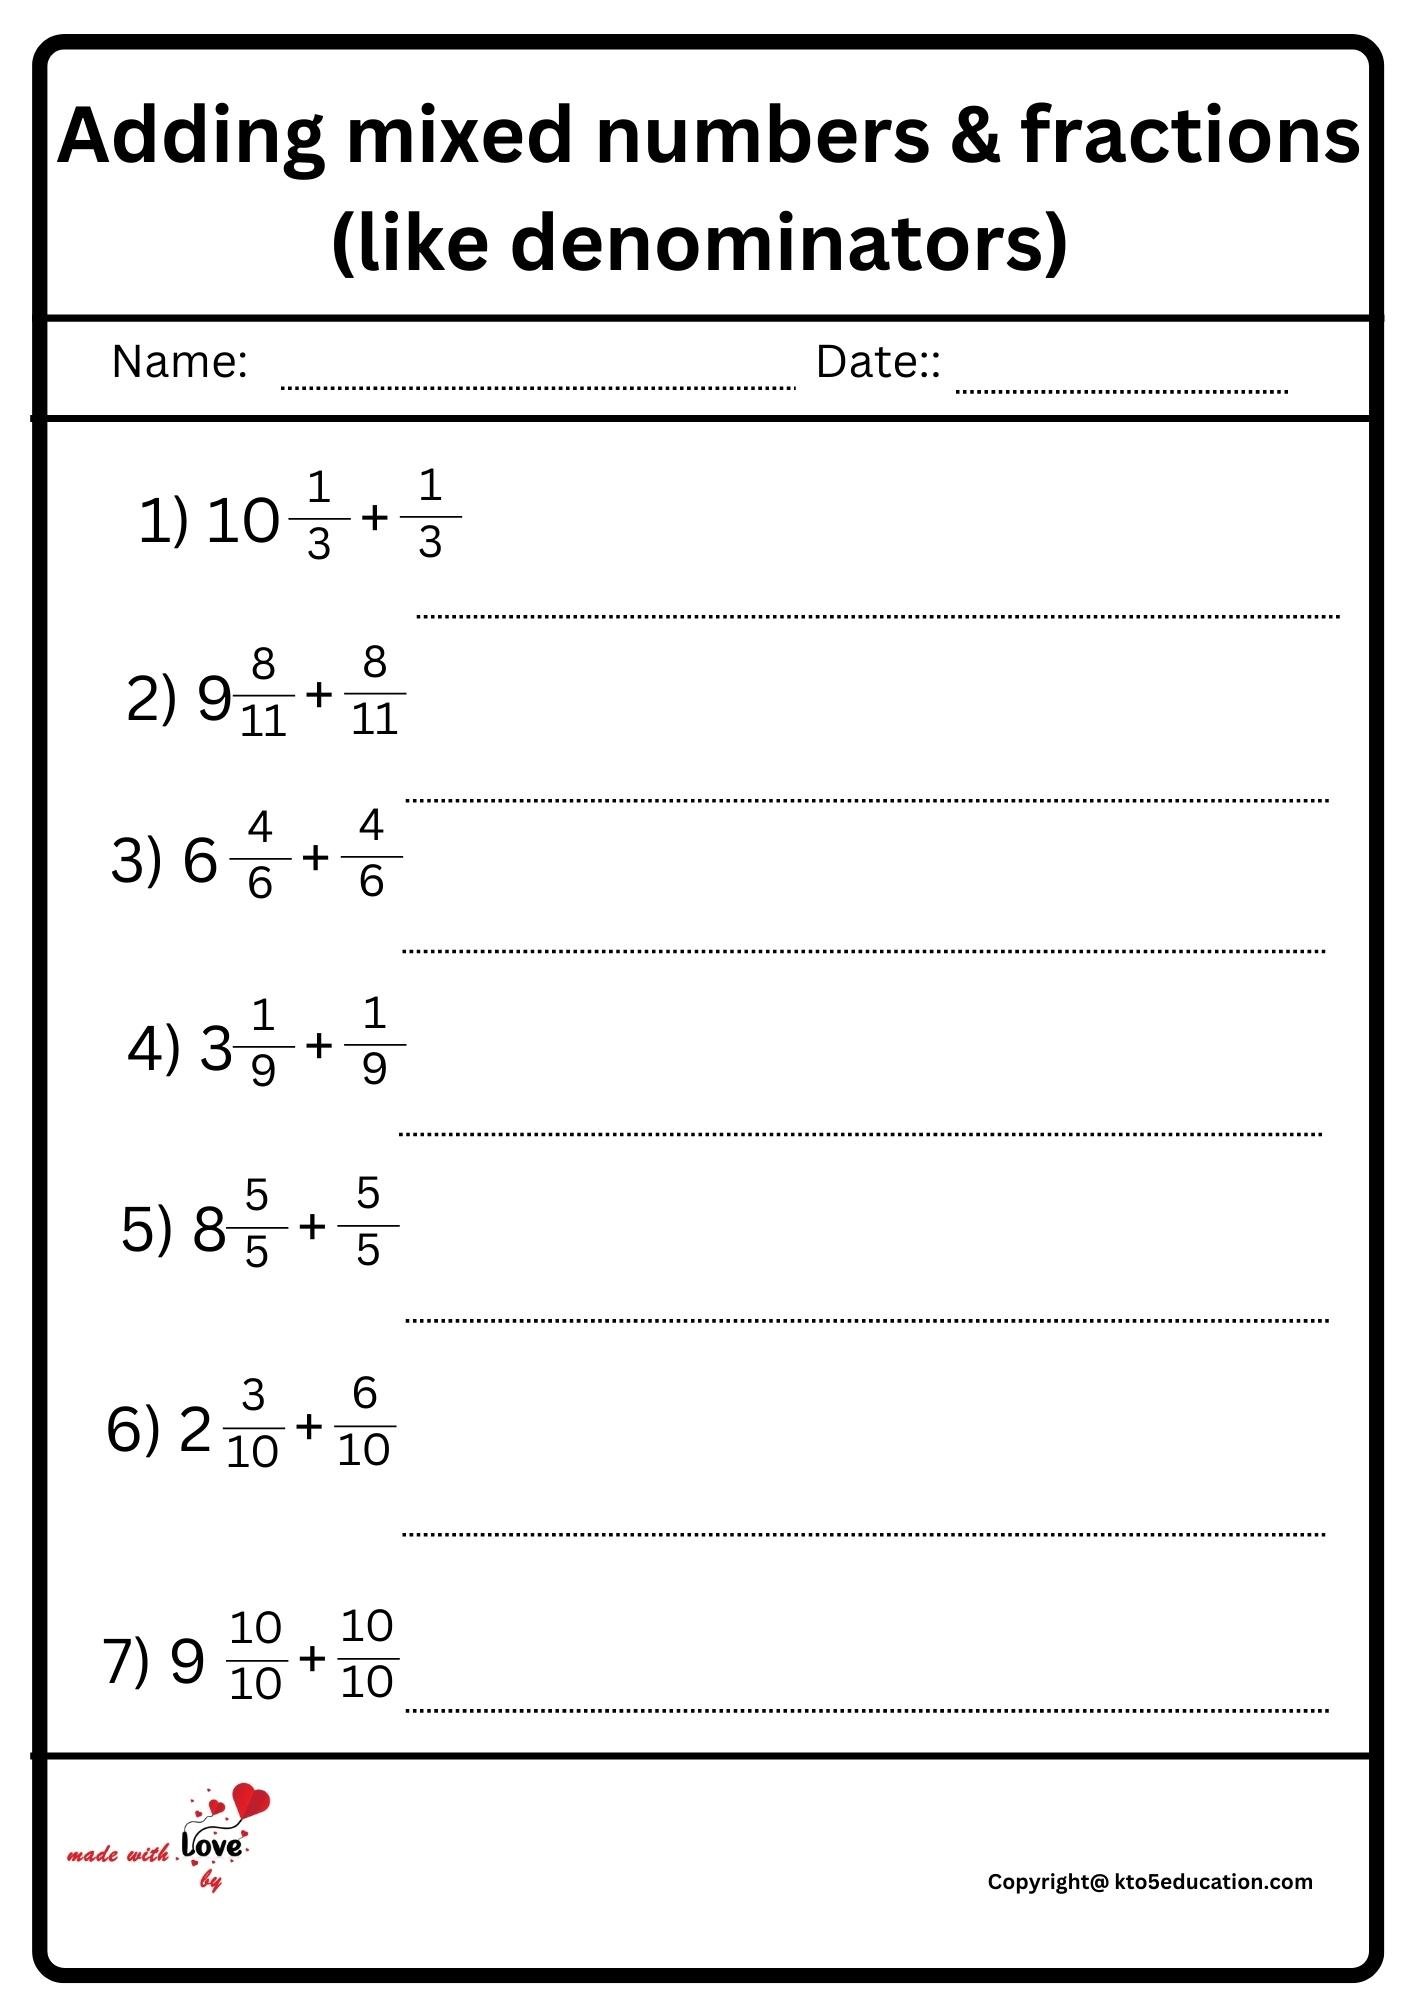 Adding Mixed Numbers And Fractions ( Like denominators) Worksheet 2